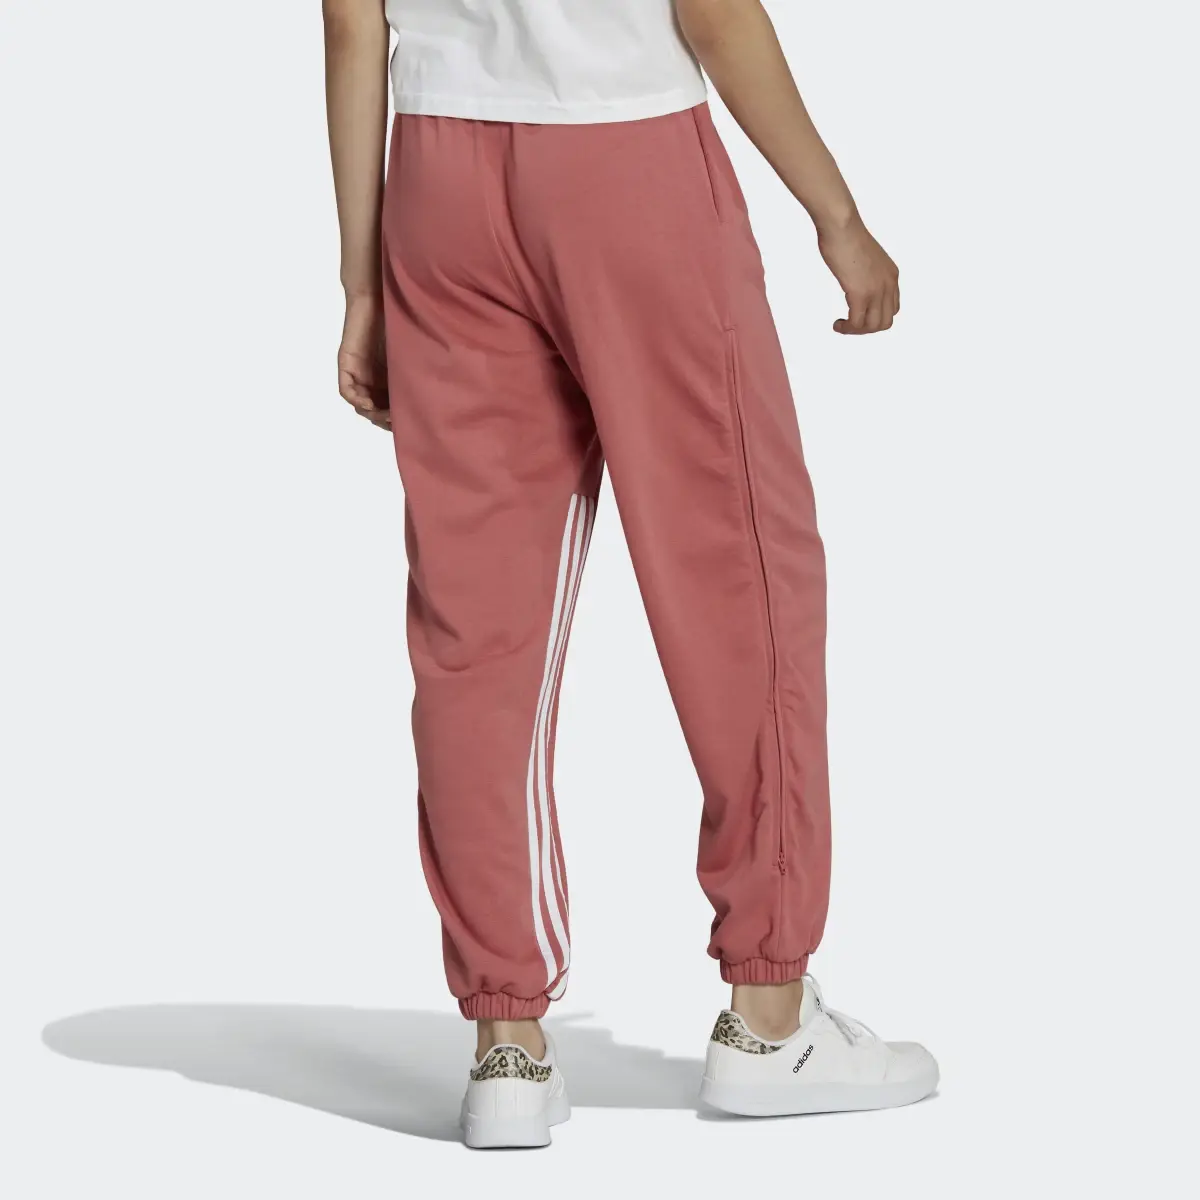 Adidas Hyperglam 3-Stripes Oversized Cuffed Joggers with Side Zippers. 2